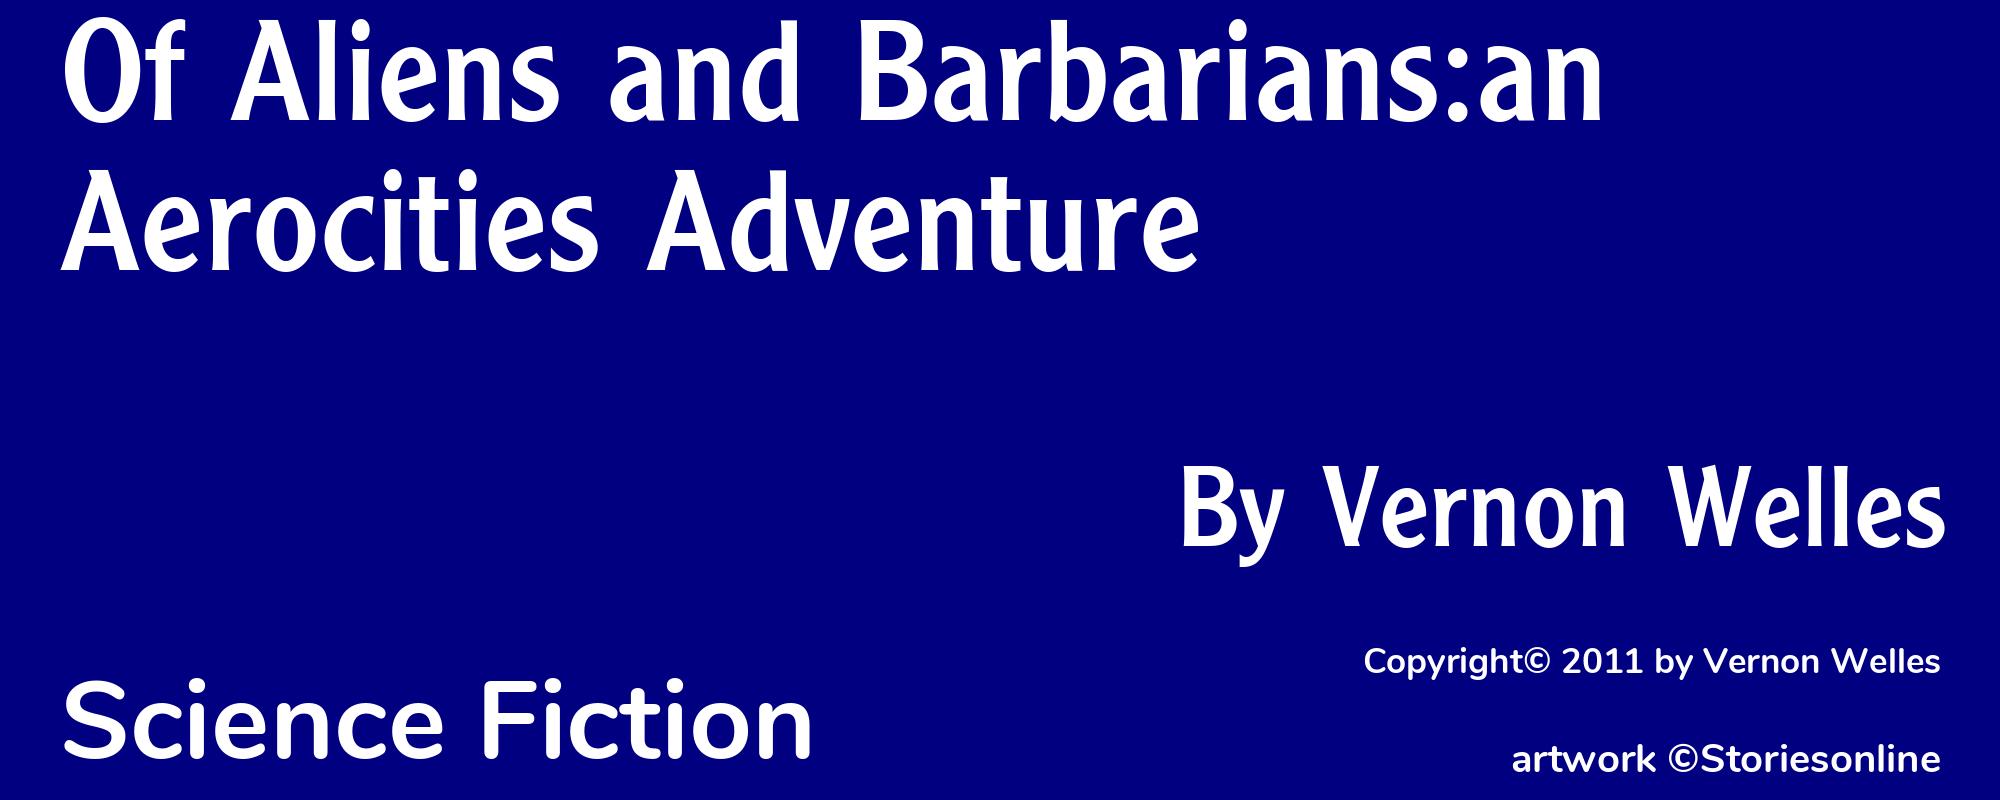 Of Aliens and Barbarians:an Aerocities Adventure - Cover